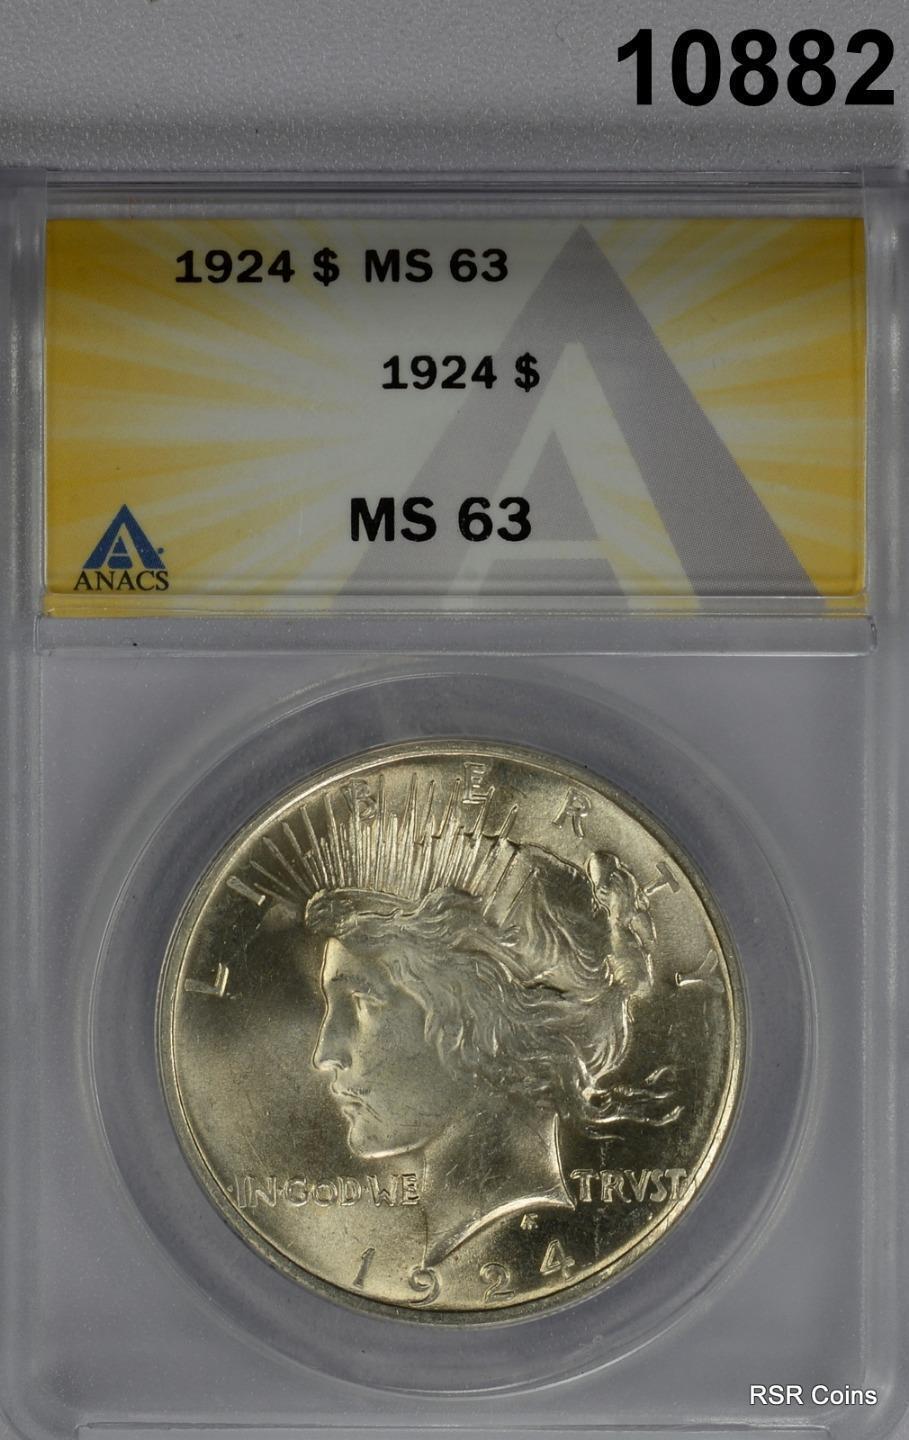 1924 PEACE SILVER DOLLAR ANACS CERTIFIED MS63 FLASHY LOOKS BETTER!! #10882